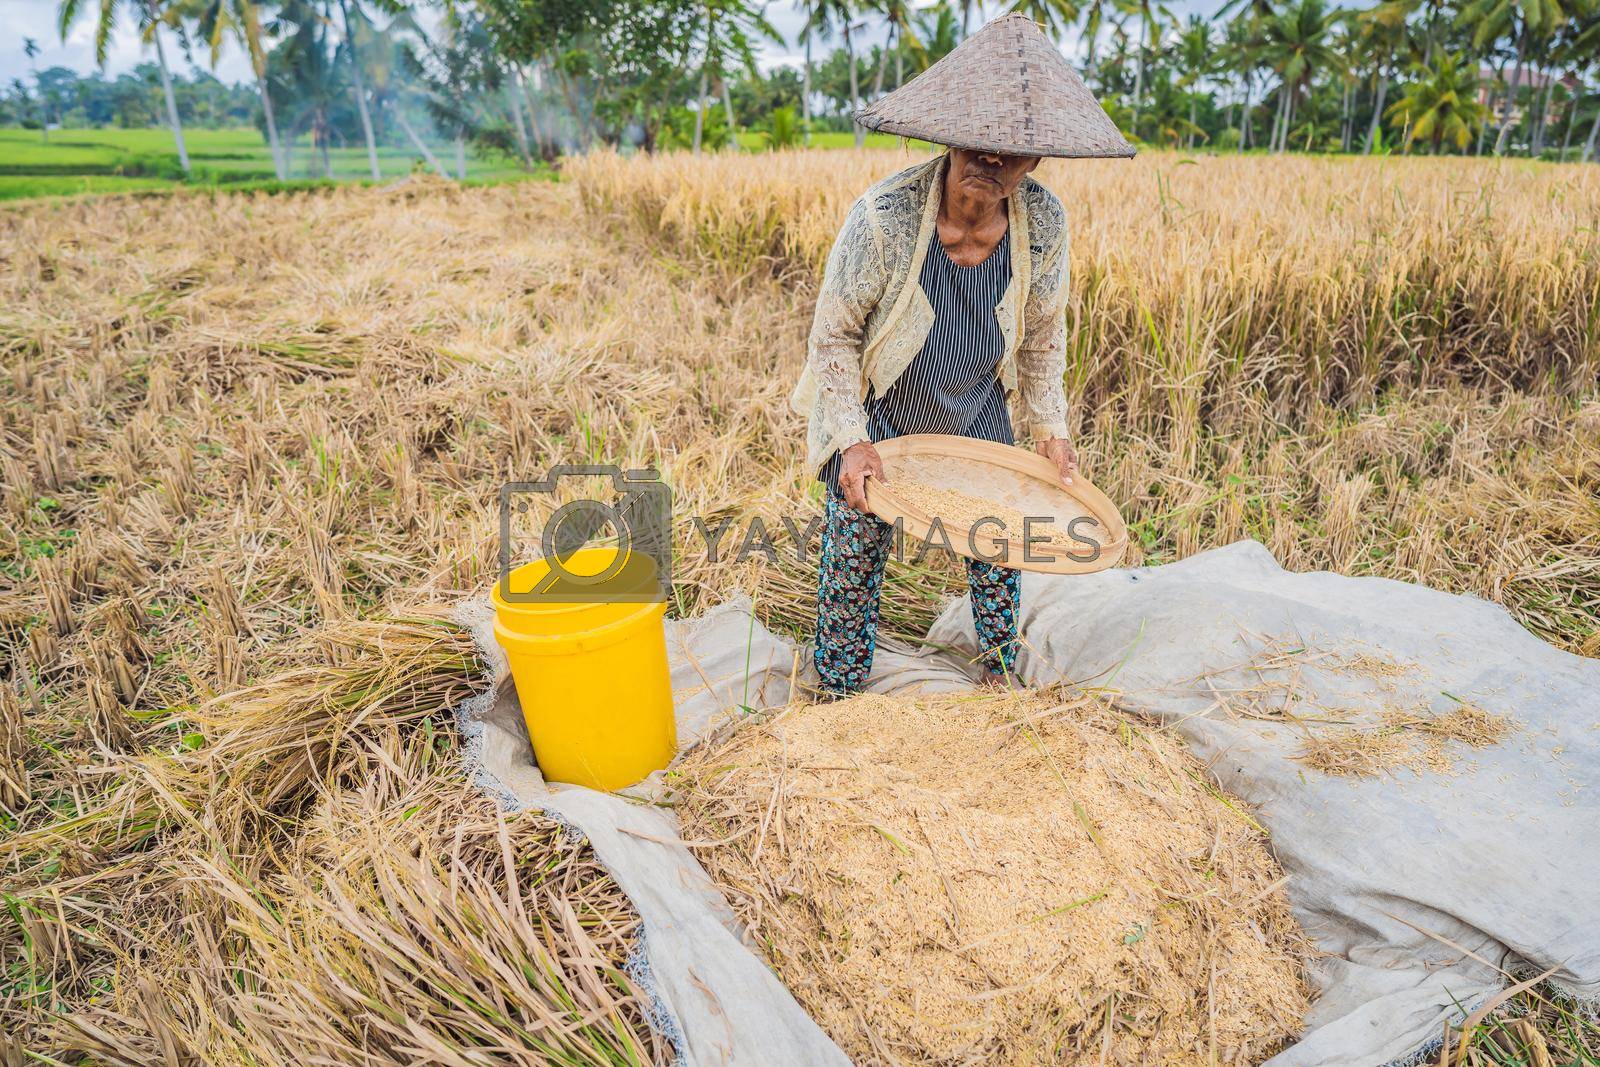 May 23, 2019, Indonesia, Bali: Indonesian farmer sifting rice in the fields of Ubud, Bali. A common practice done in rural China, Vietnam, Thailand, Myanmar, Philippines